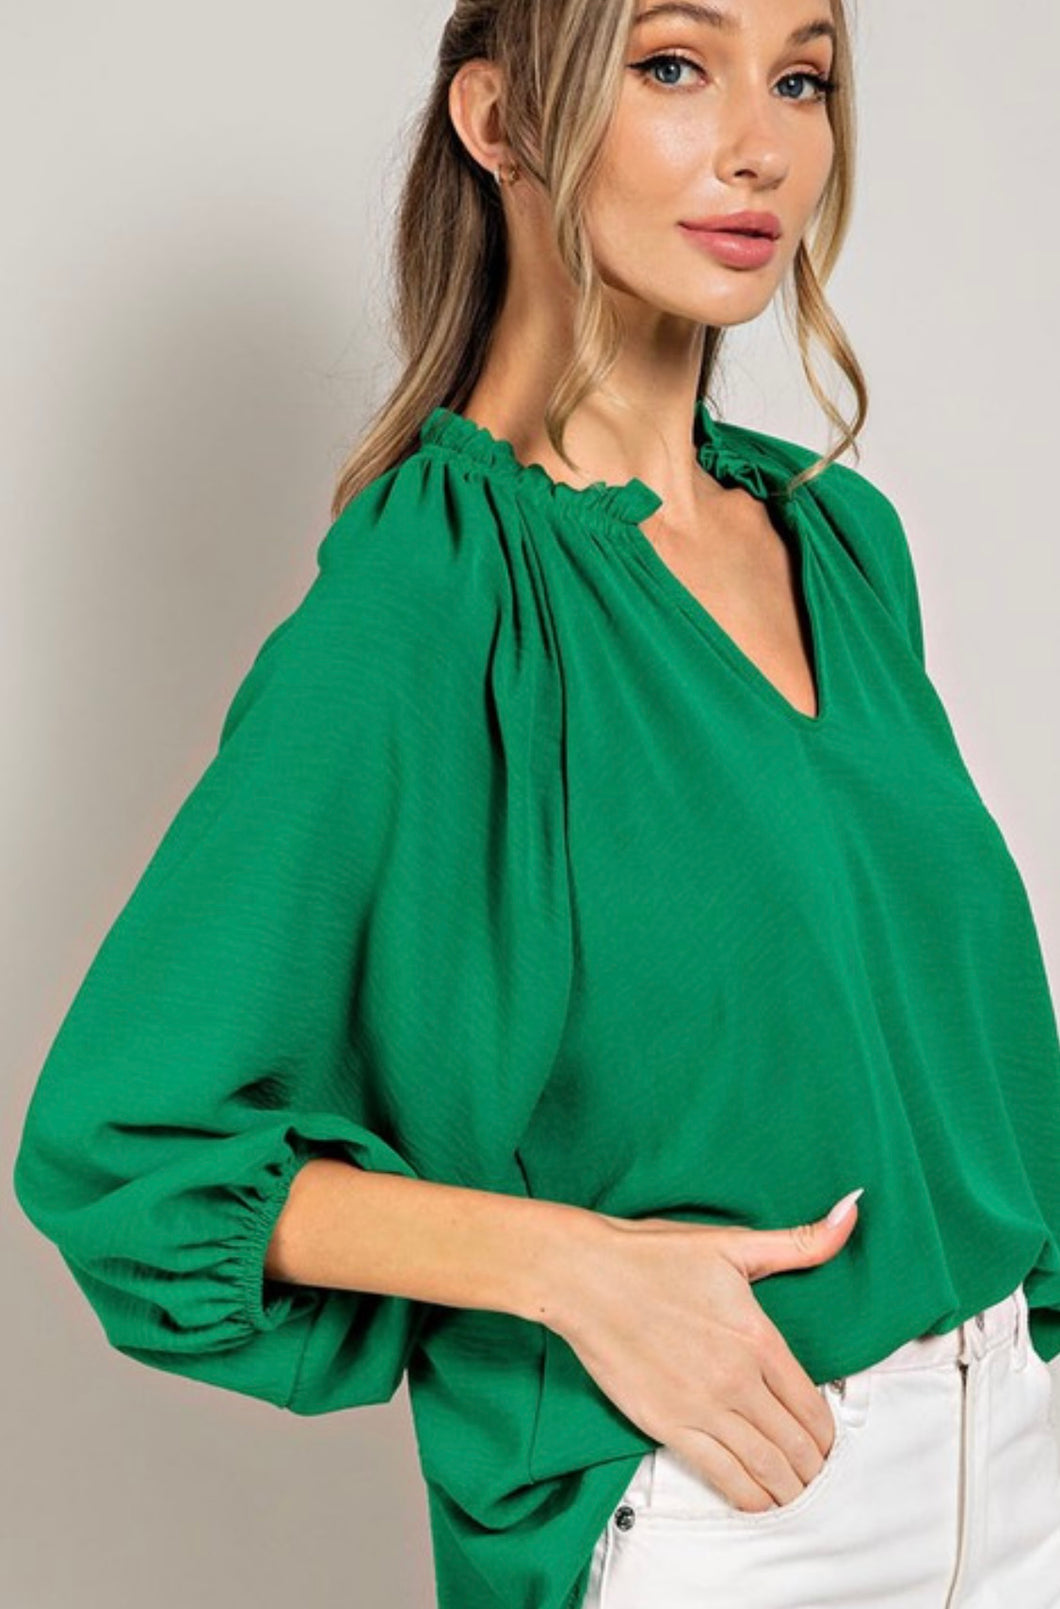 Top: Kelly Green Top